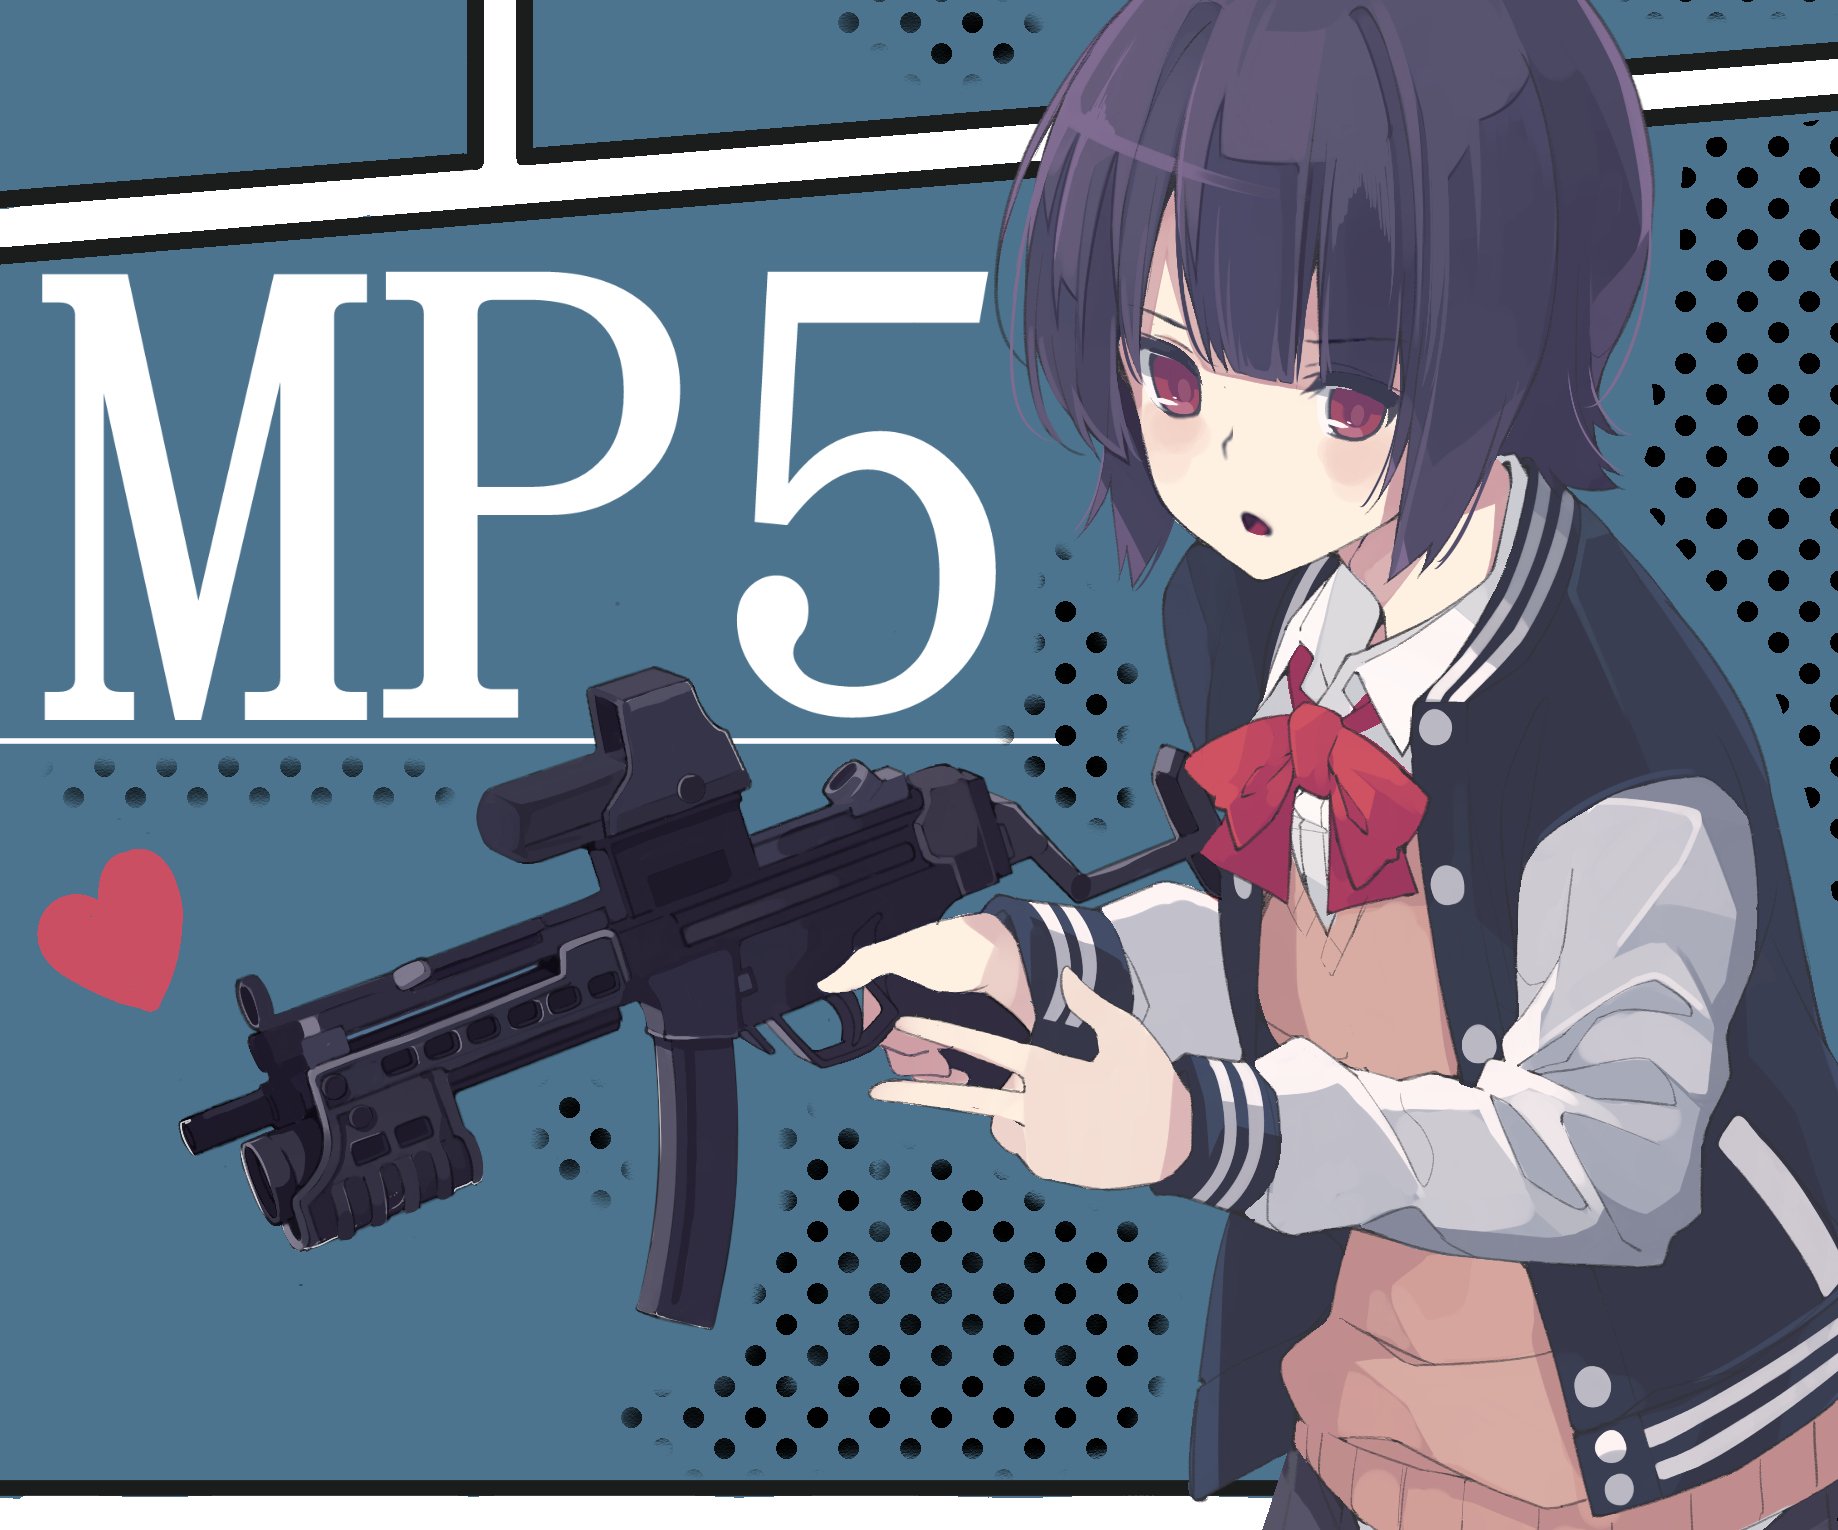 Anime Girls with Guns - One day I'll own an MP5 clone. One day. Series:  Upotte!! Character: MP5 http://danbooru.donmai.us/posts/2698340 -Gun Dae |  Facebook